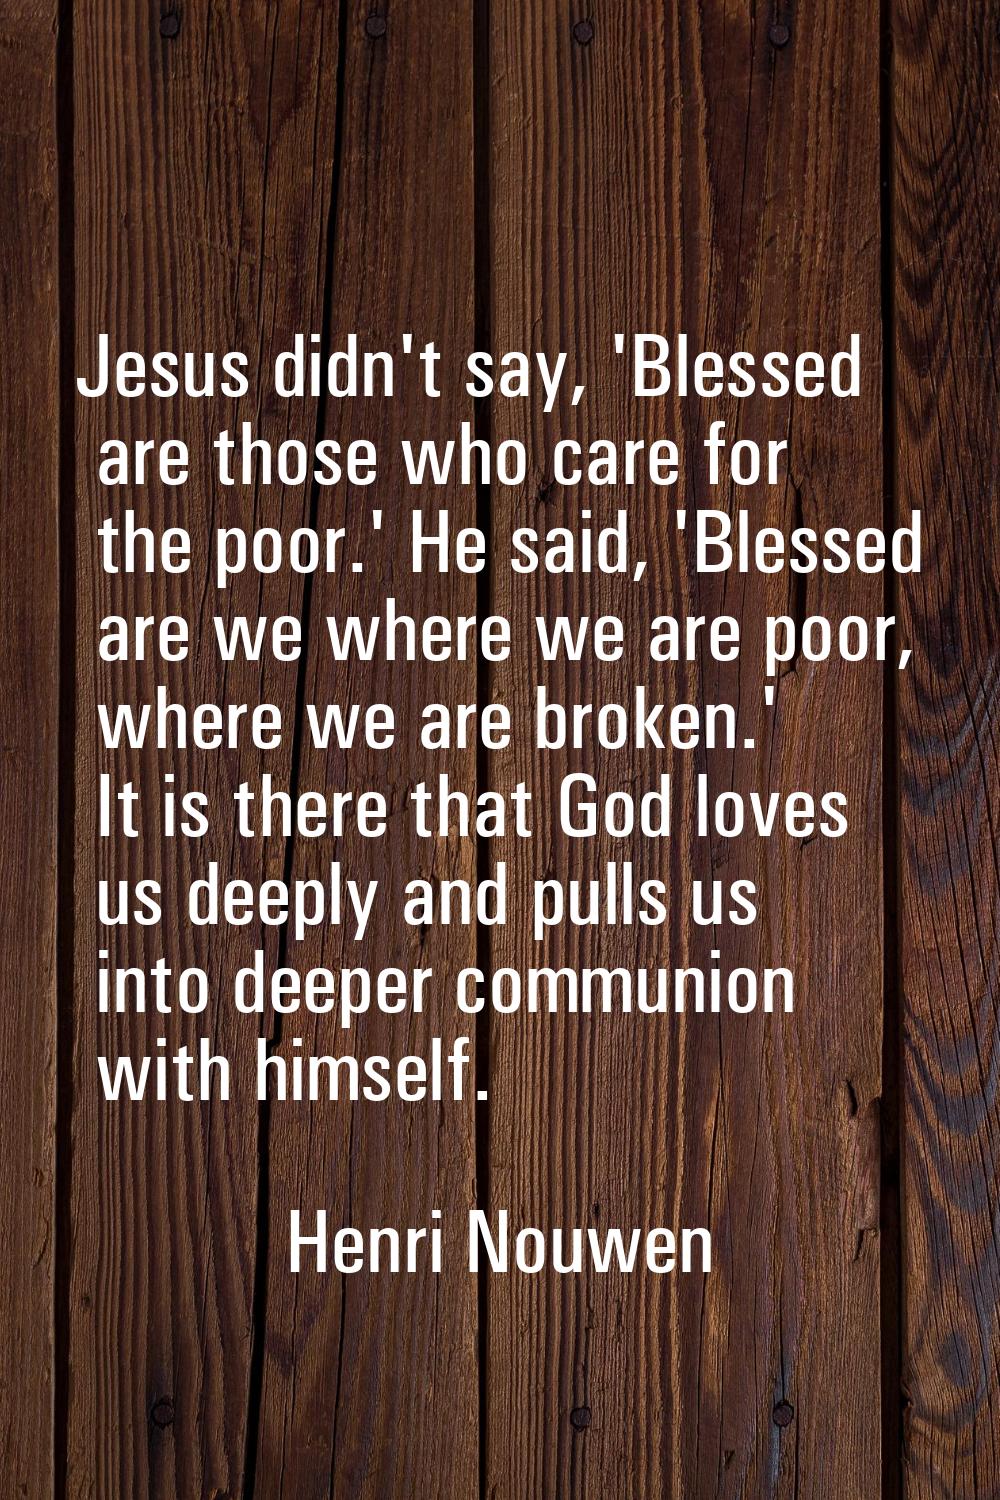 Jesus didn't say, 'Blessed are those who care for the poor.' He said, 'Blessed are we where we are 